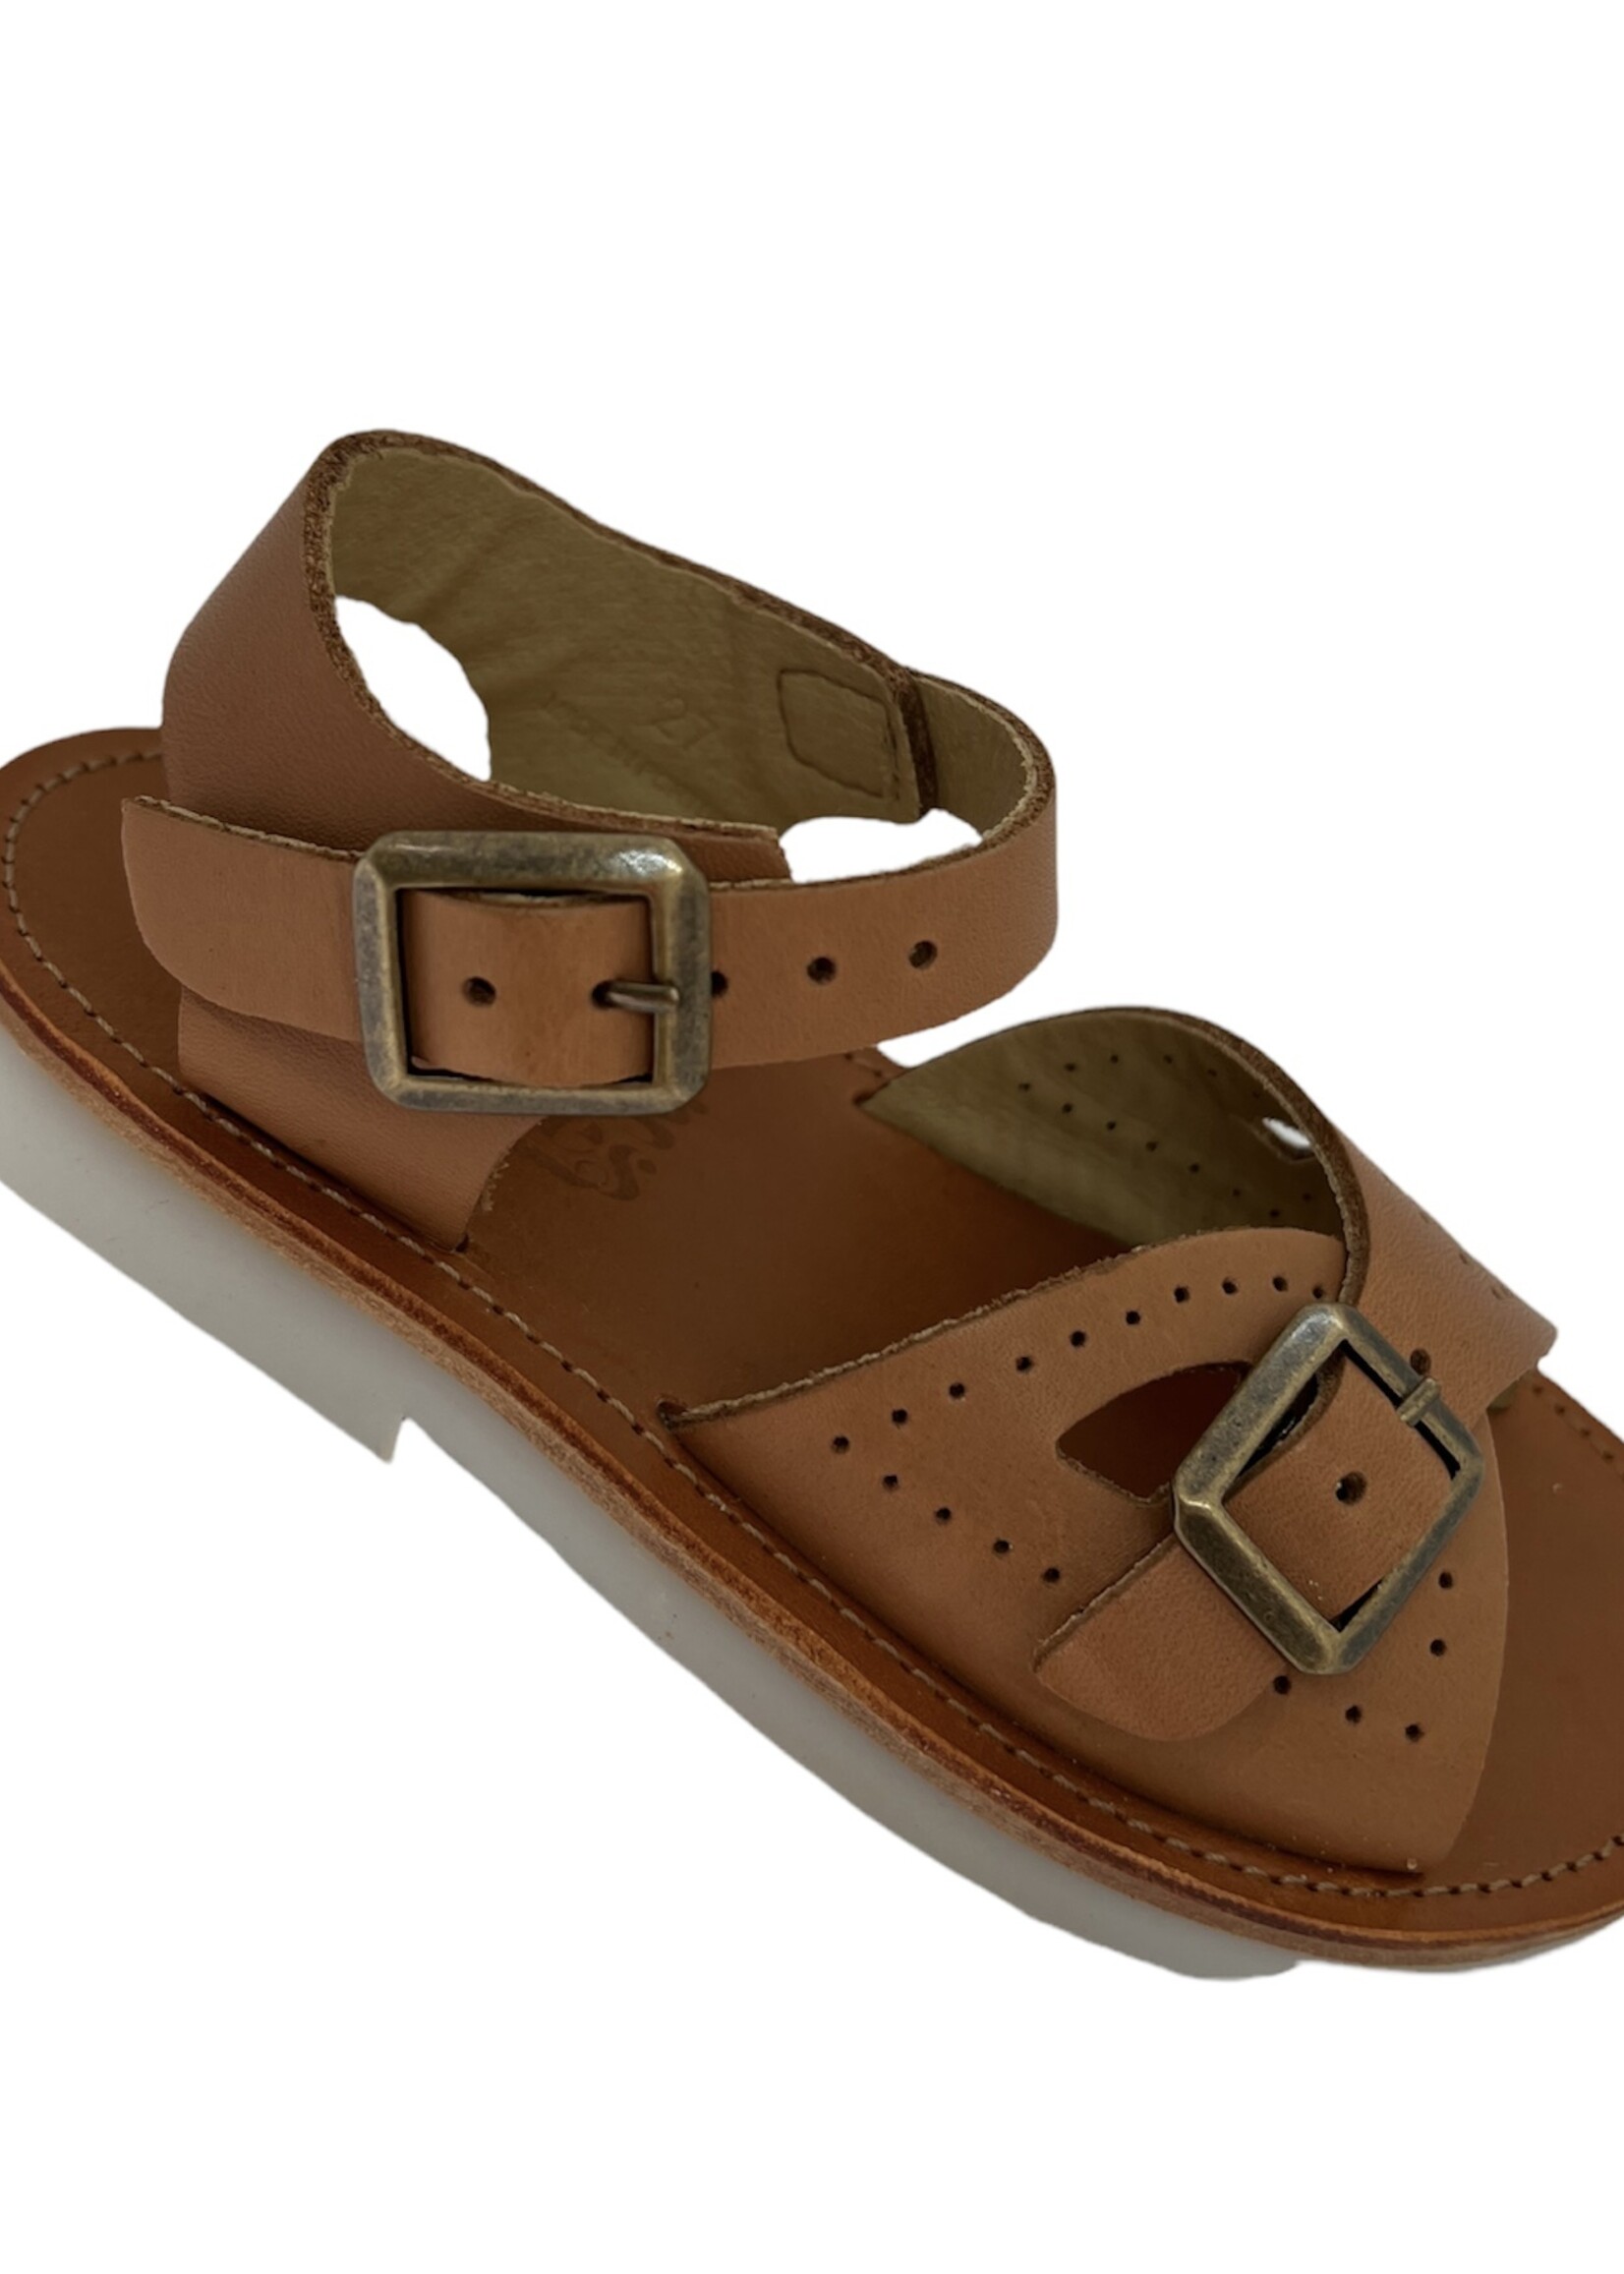 Young Soles  sandals rubber sole clay